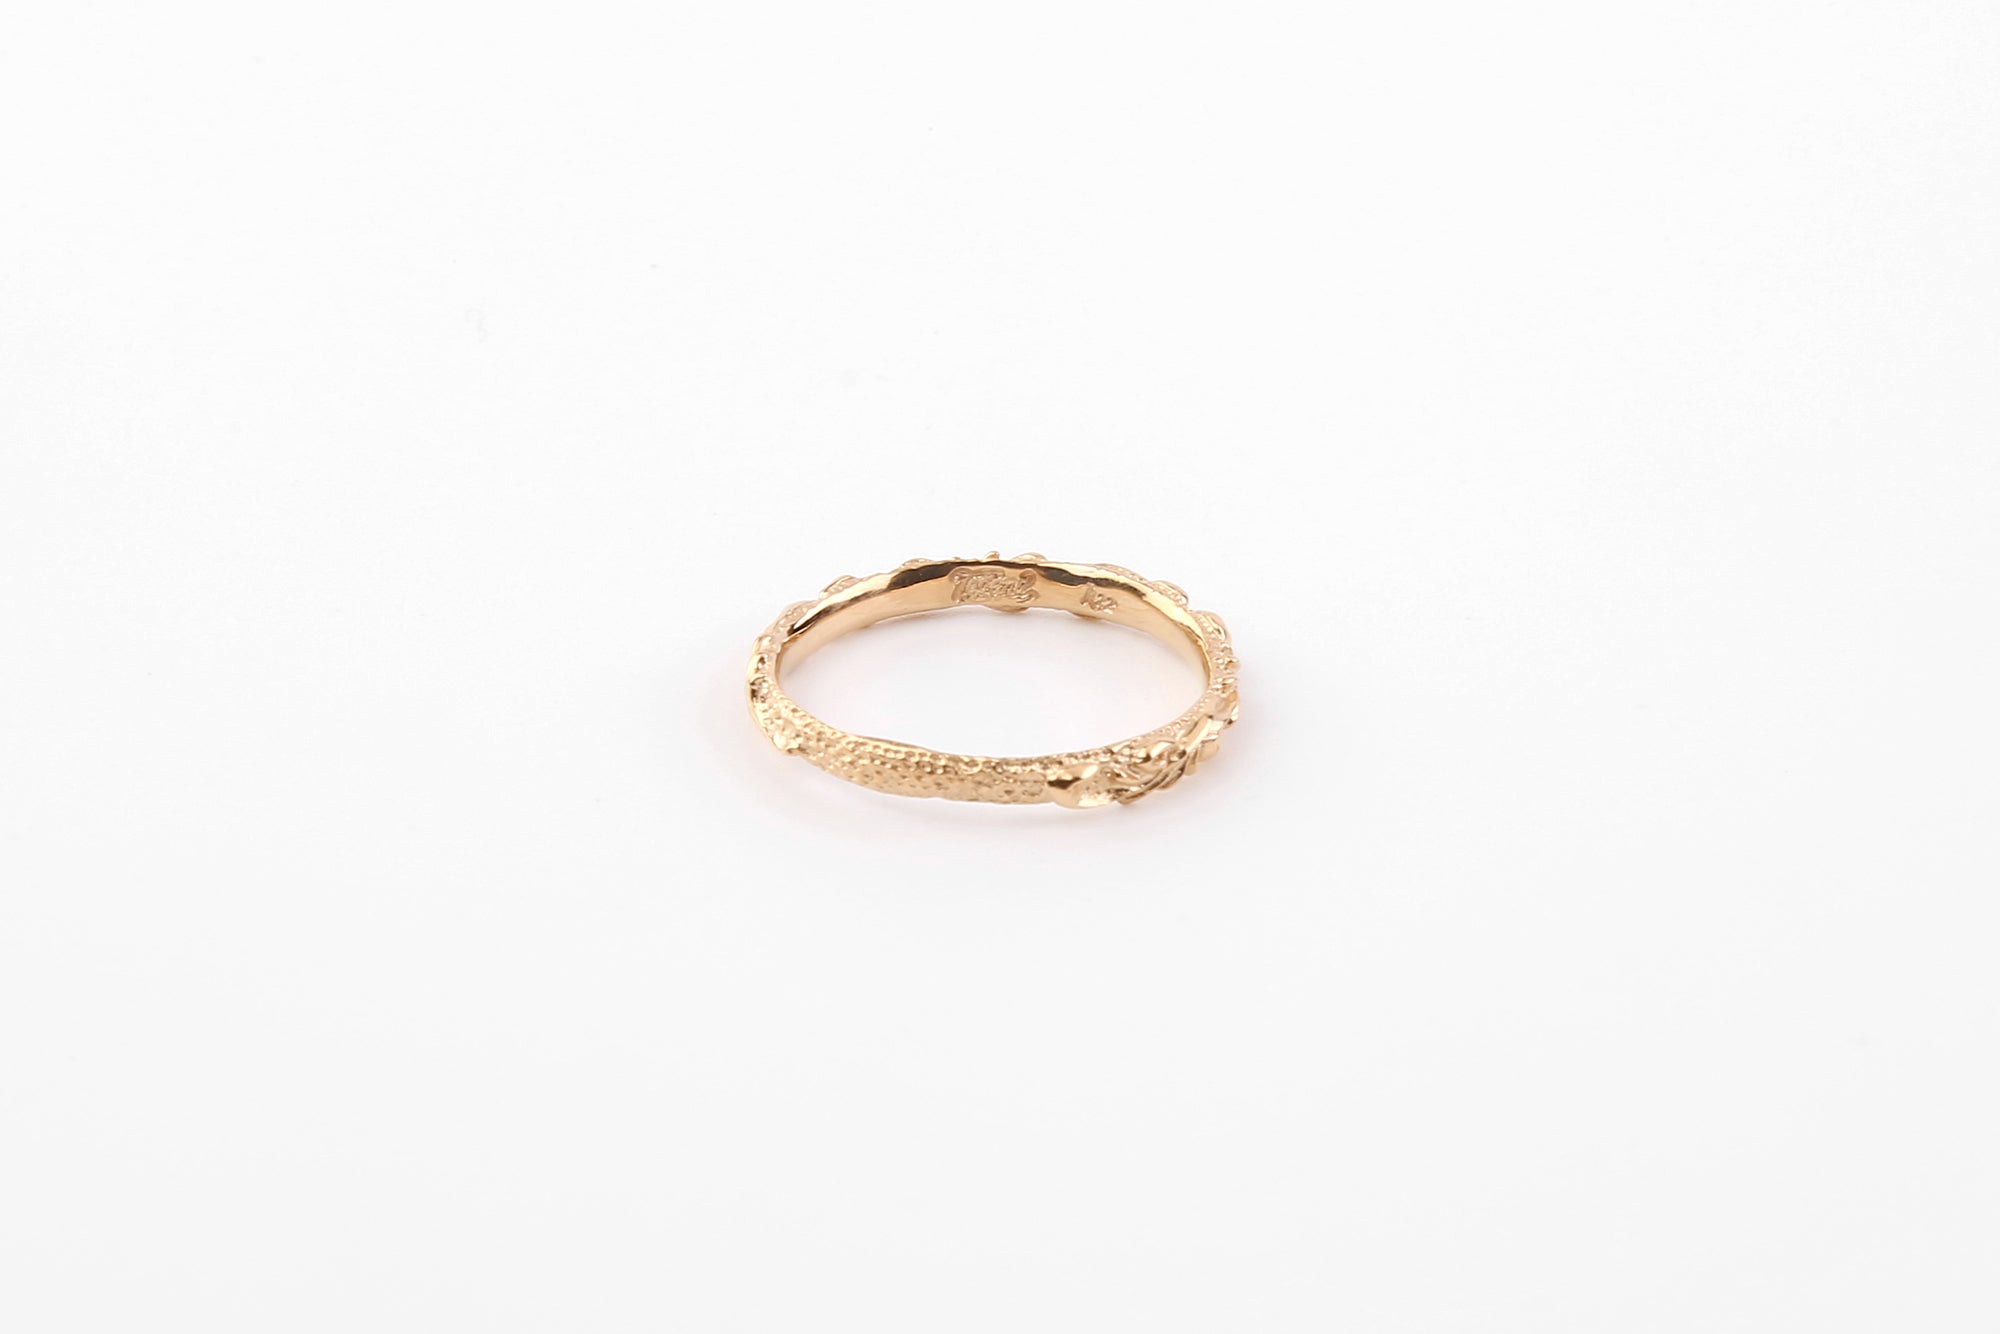 Legend Extra Small "Flora" 22k Gold Ring